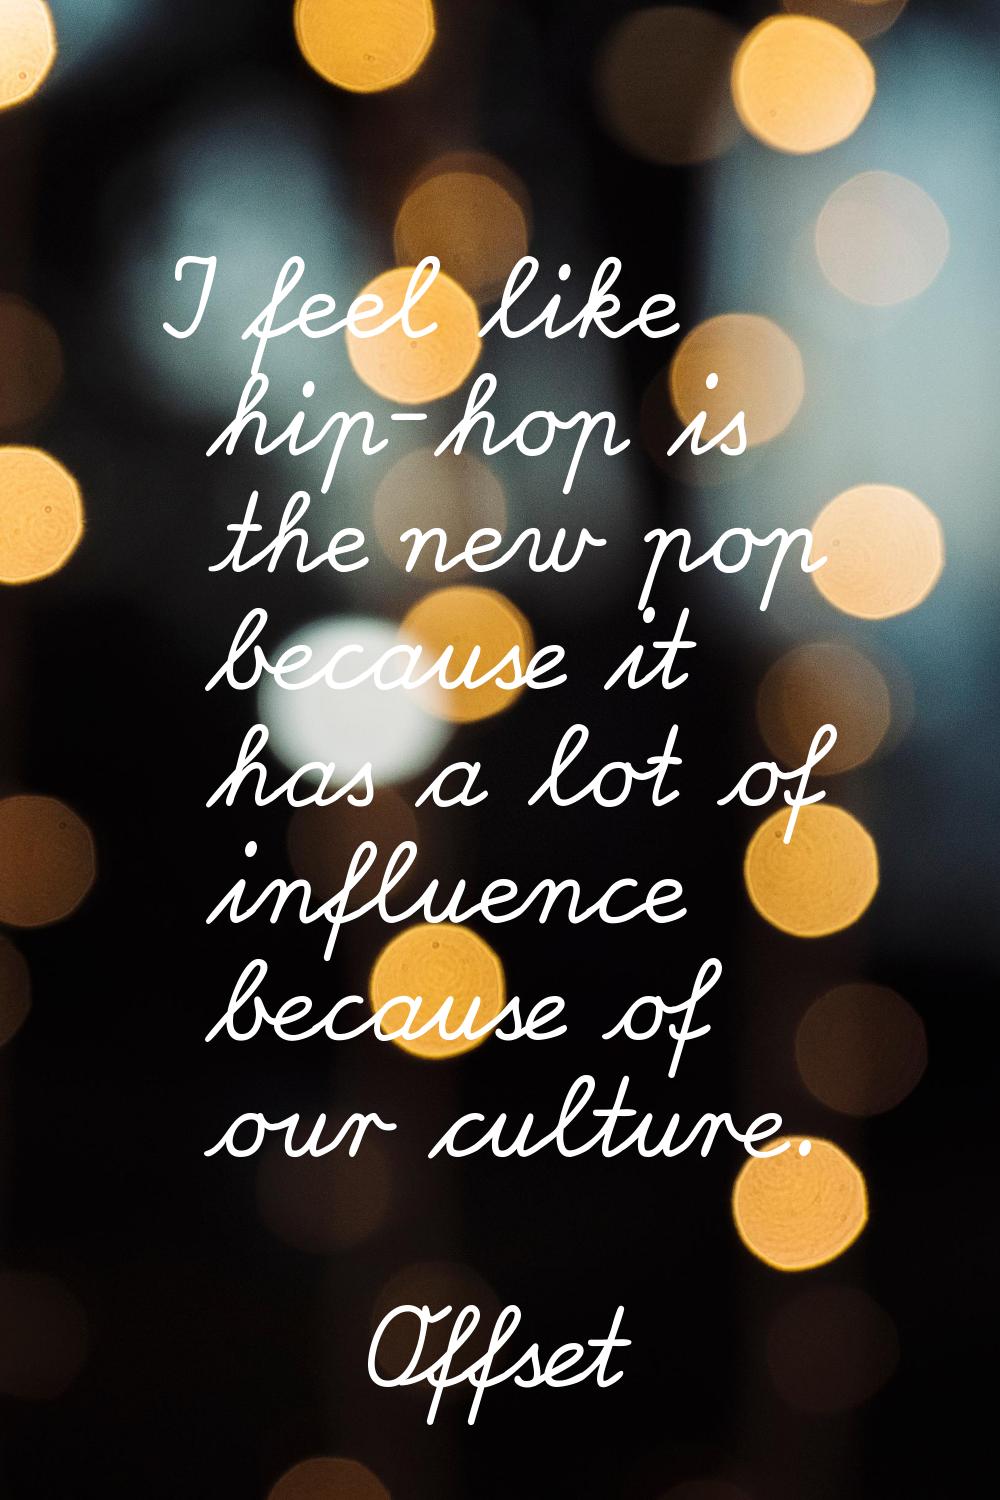 I feel like hip-hop is the new pop because it has a lot of influence because of our culture.